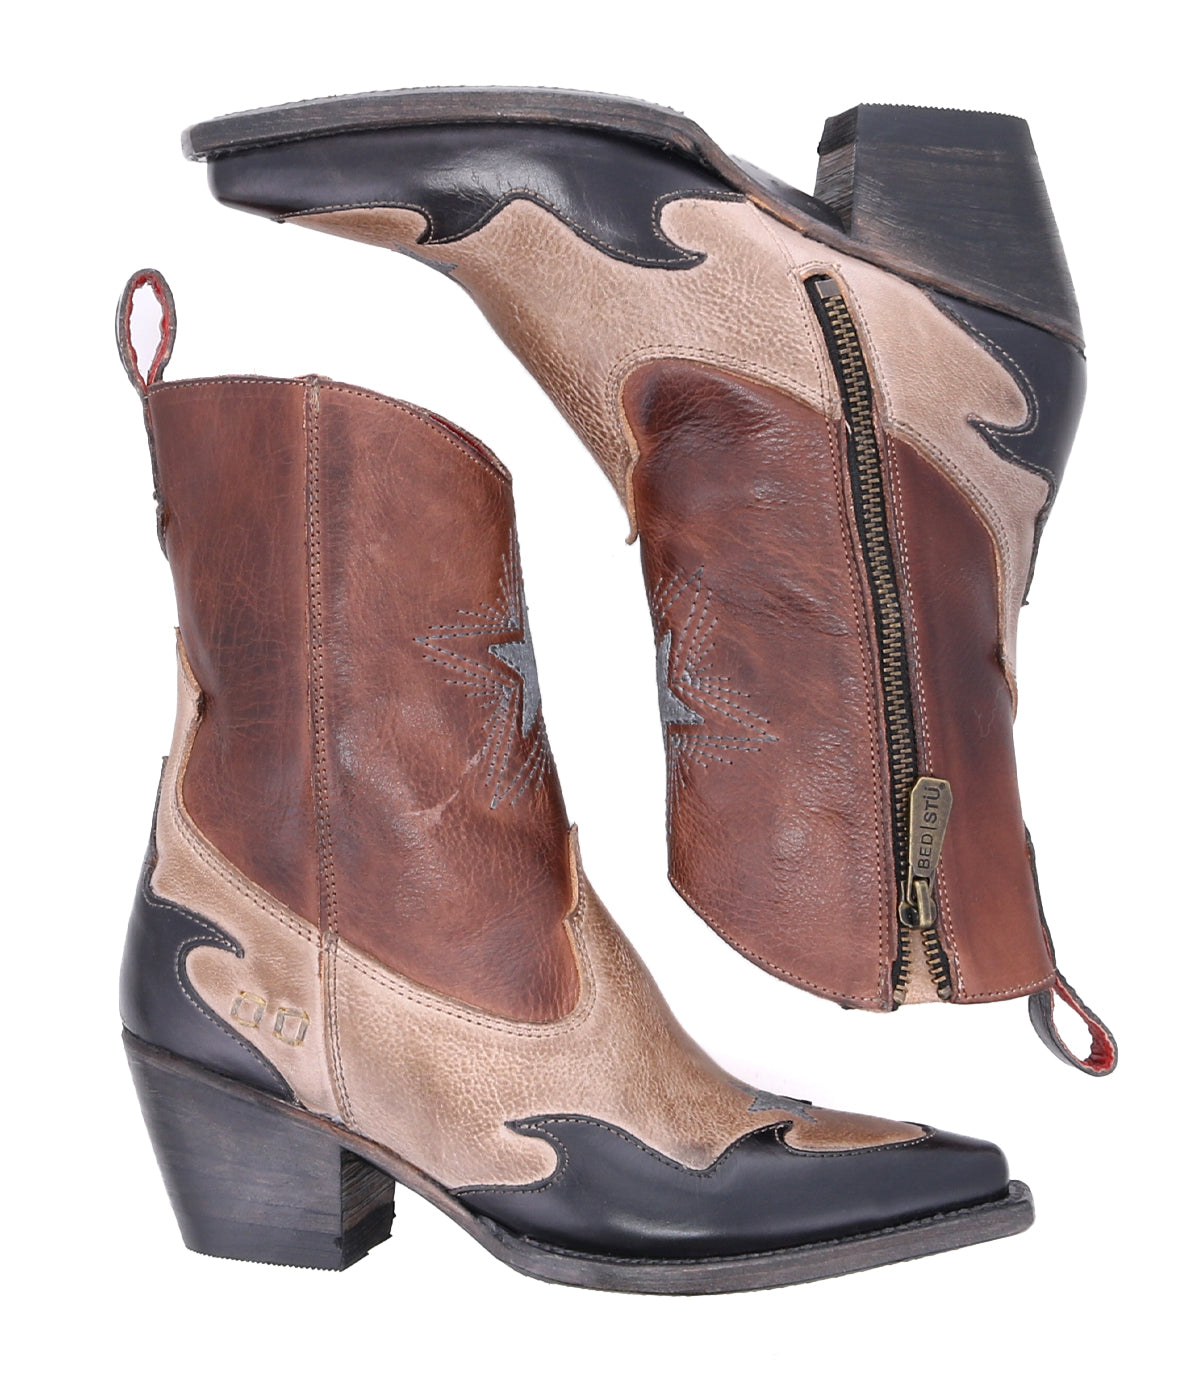 A pair of Hyperspeed cowboy boots in brown and tan.